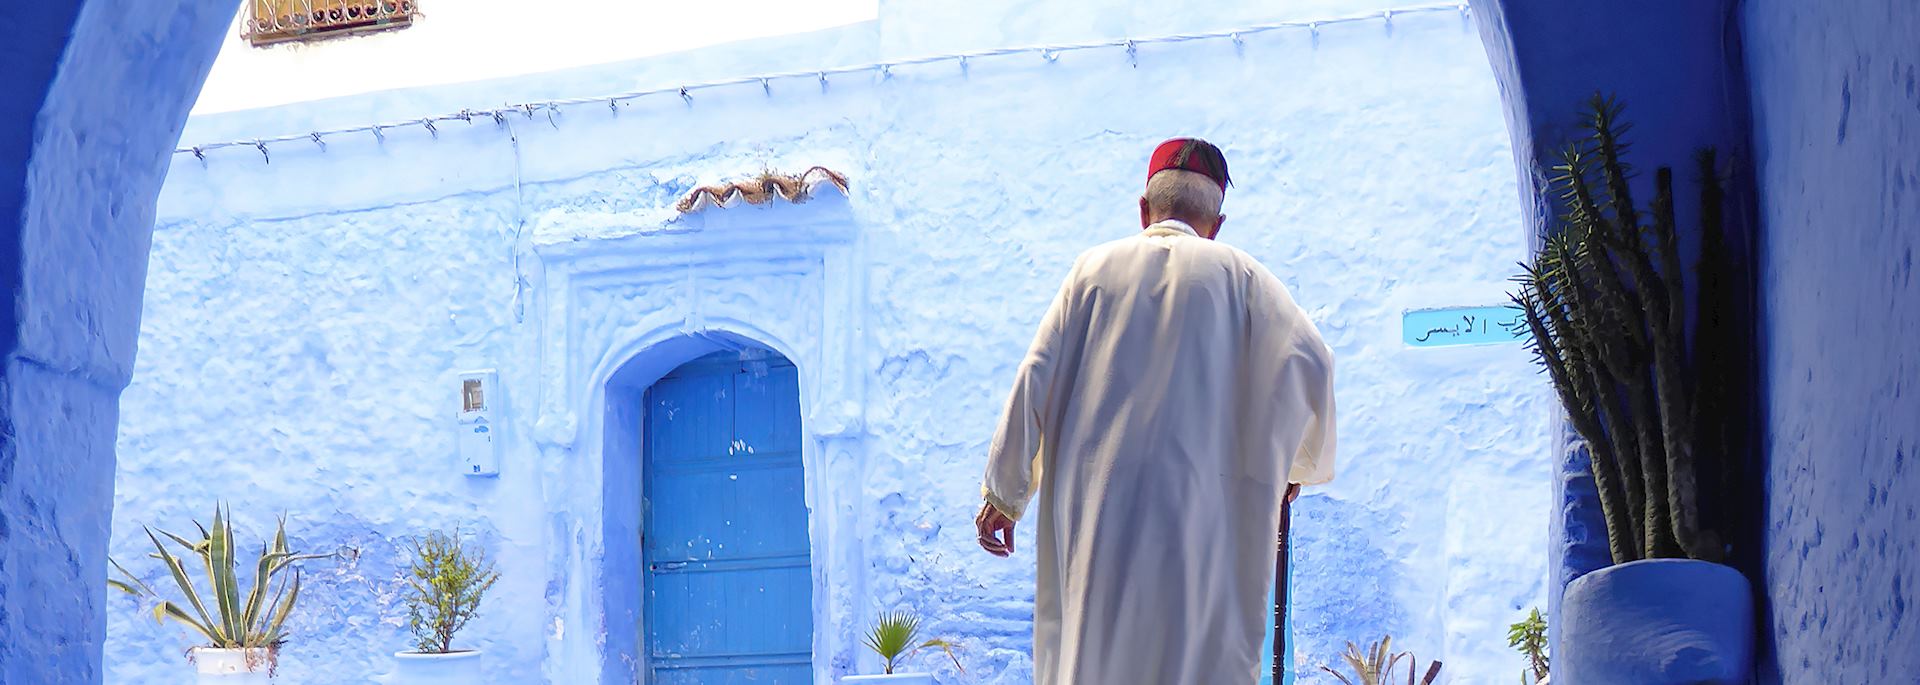 Old man in Chefchaouen